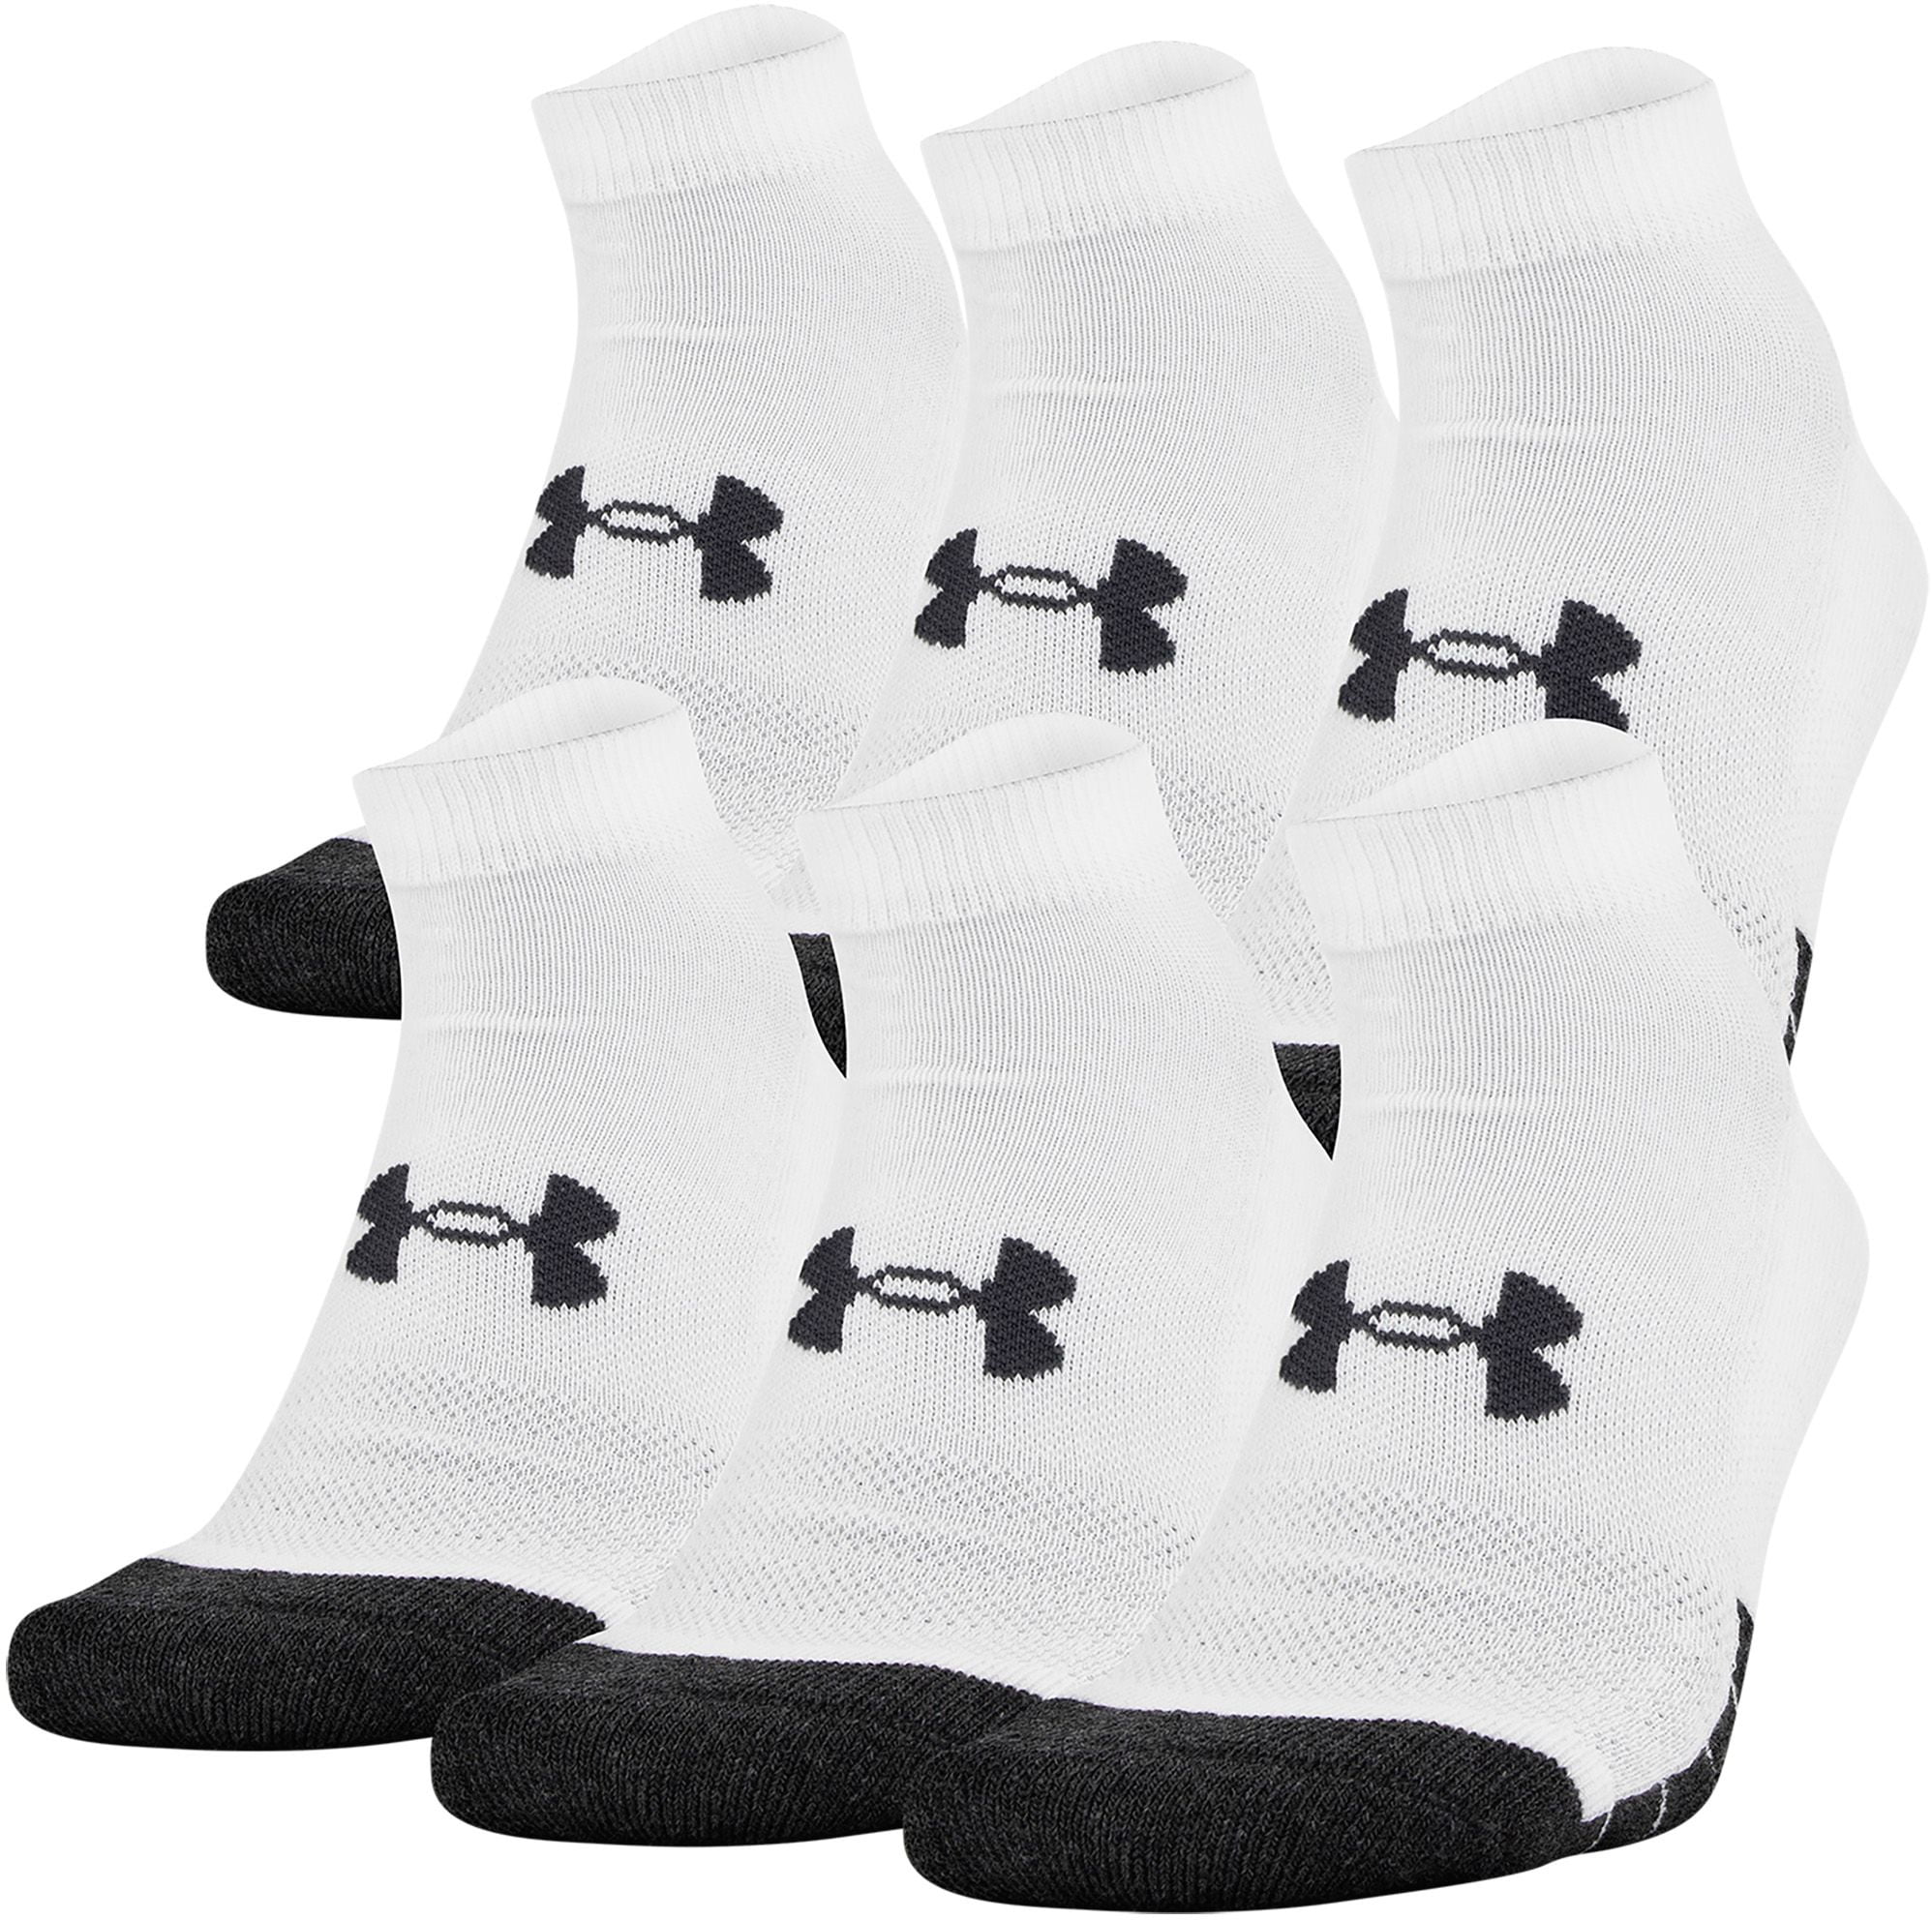 4/10 pack UA Under Armour Mens No Show Running Cushion Socks size L  9-12.5 